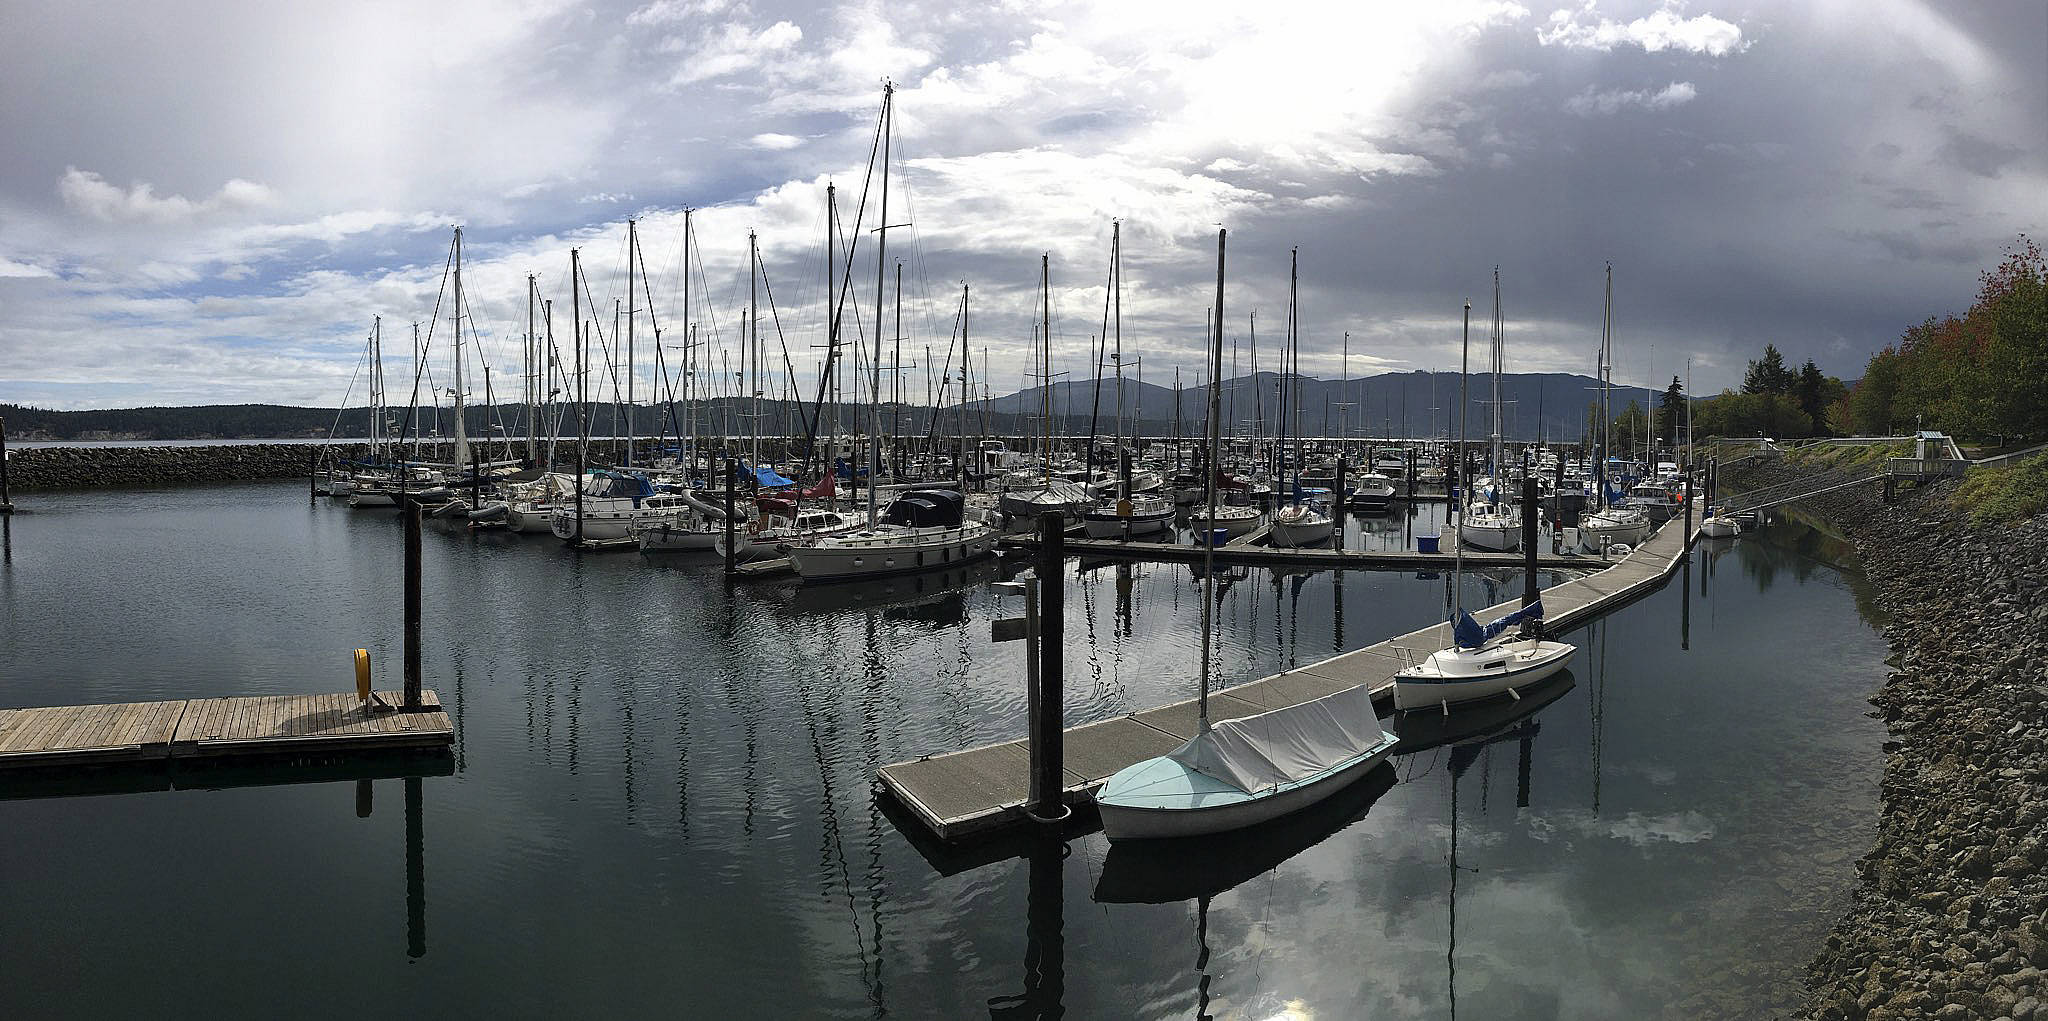 A new proposal from the city of Sequim asks contractors to evaluate current and ongoing costs for the John Wayne Marina. (Matthew Nash/Olympic Peninsula News Group)